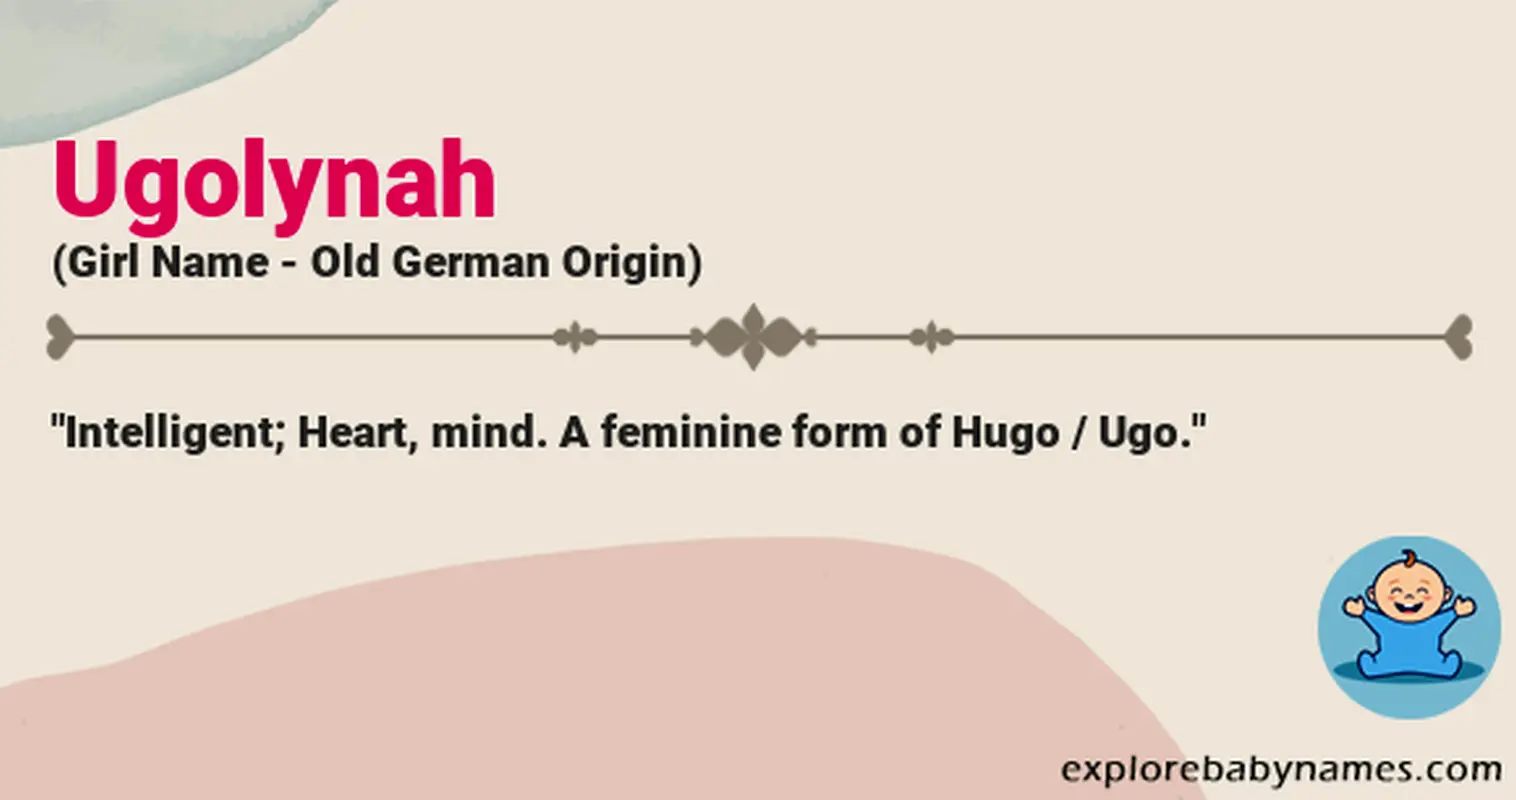 Meaning of Ugolynah